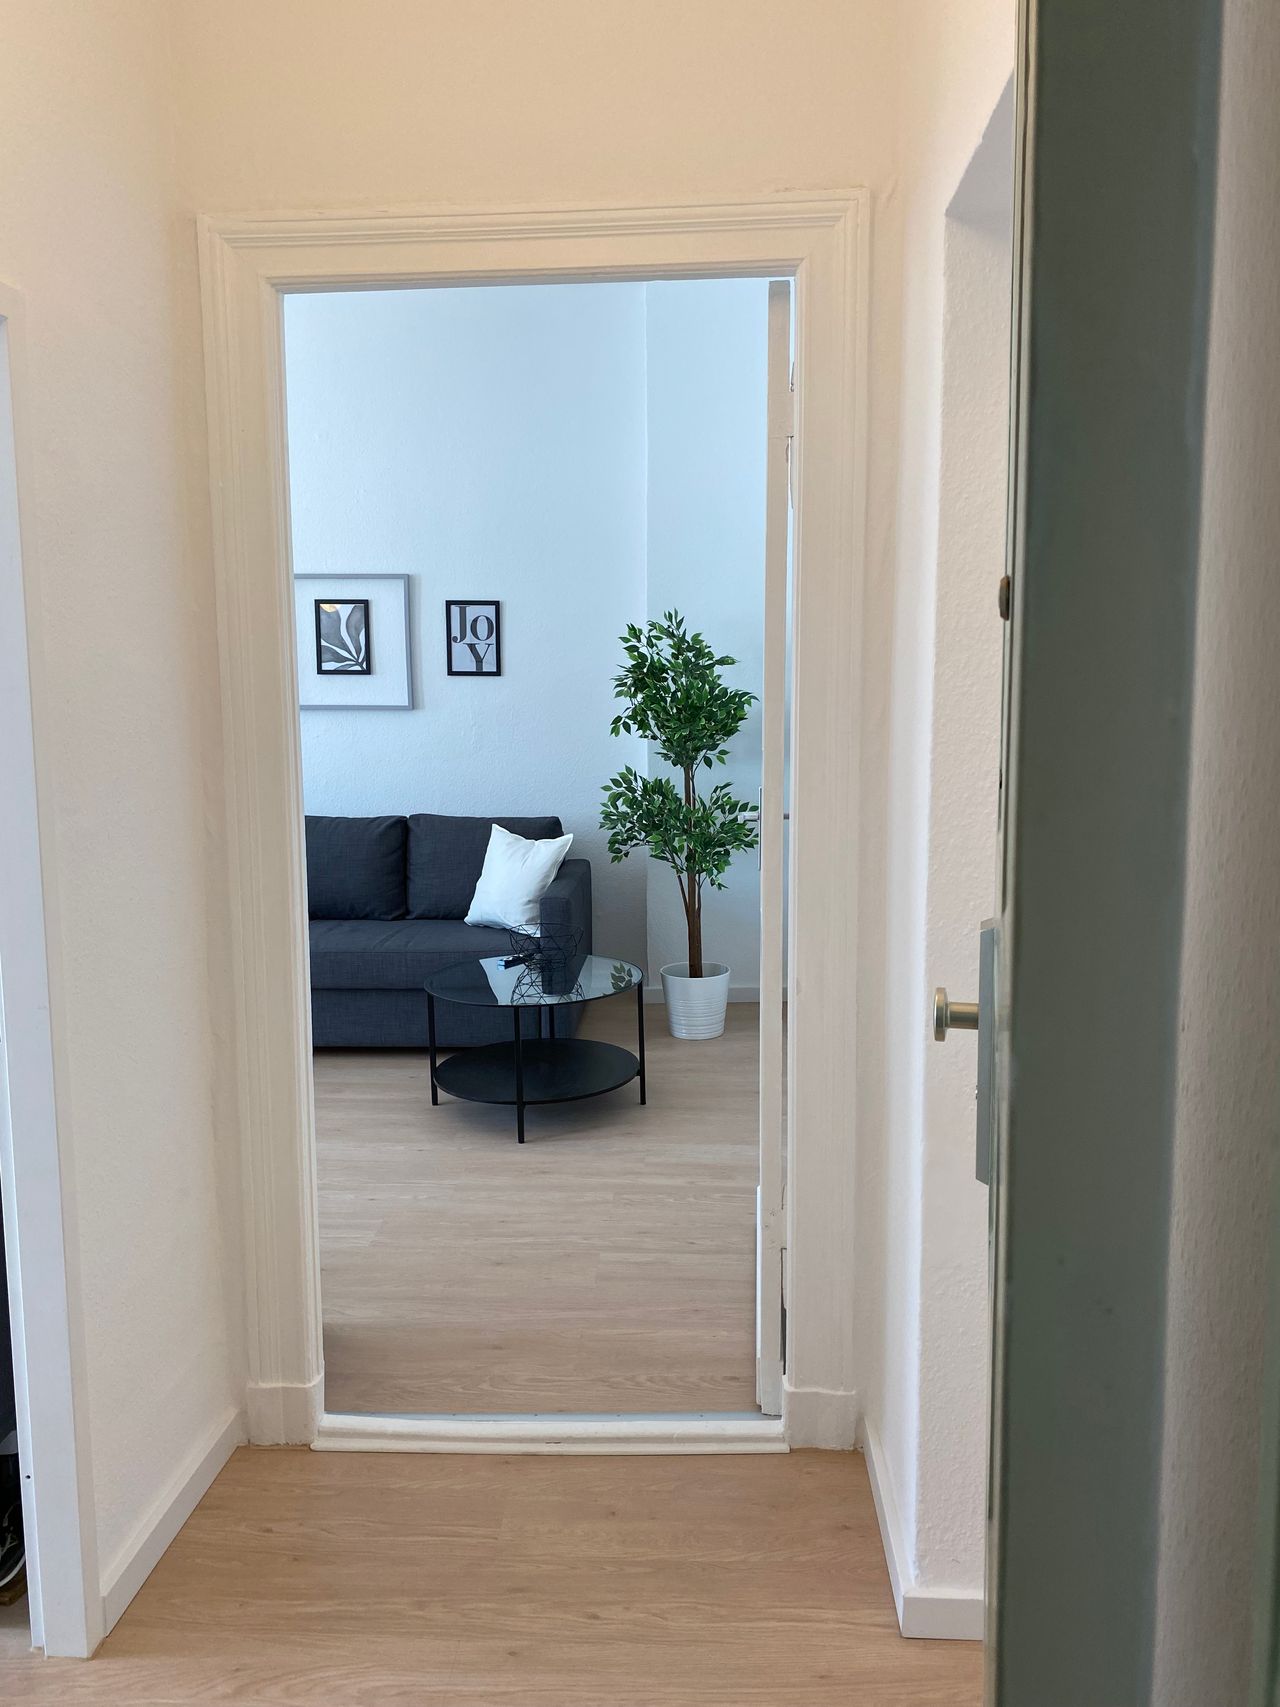 Quiet, awesome flat in Moabit